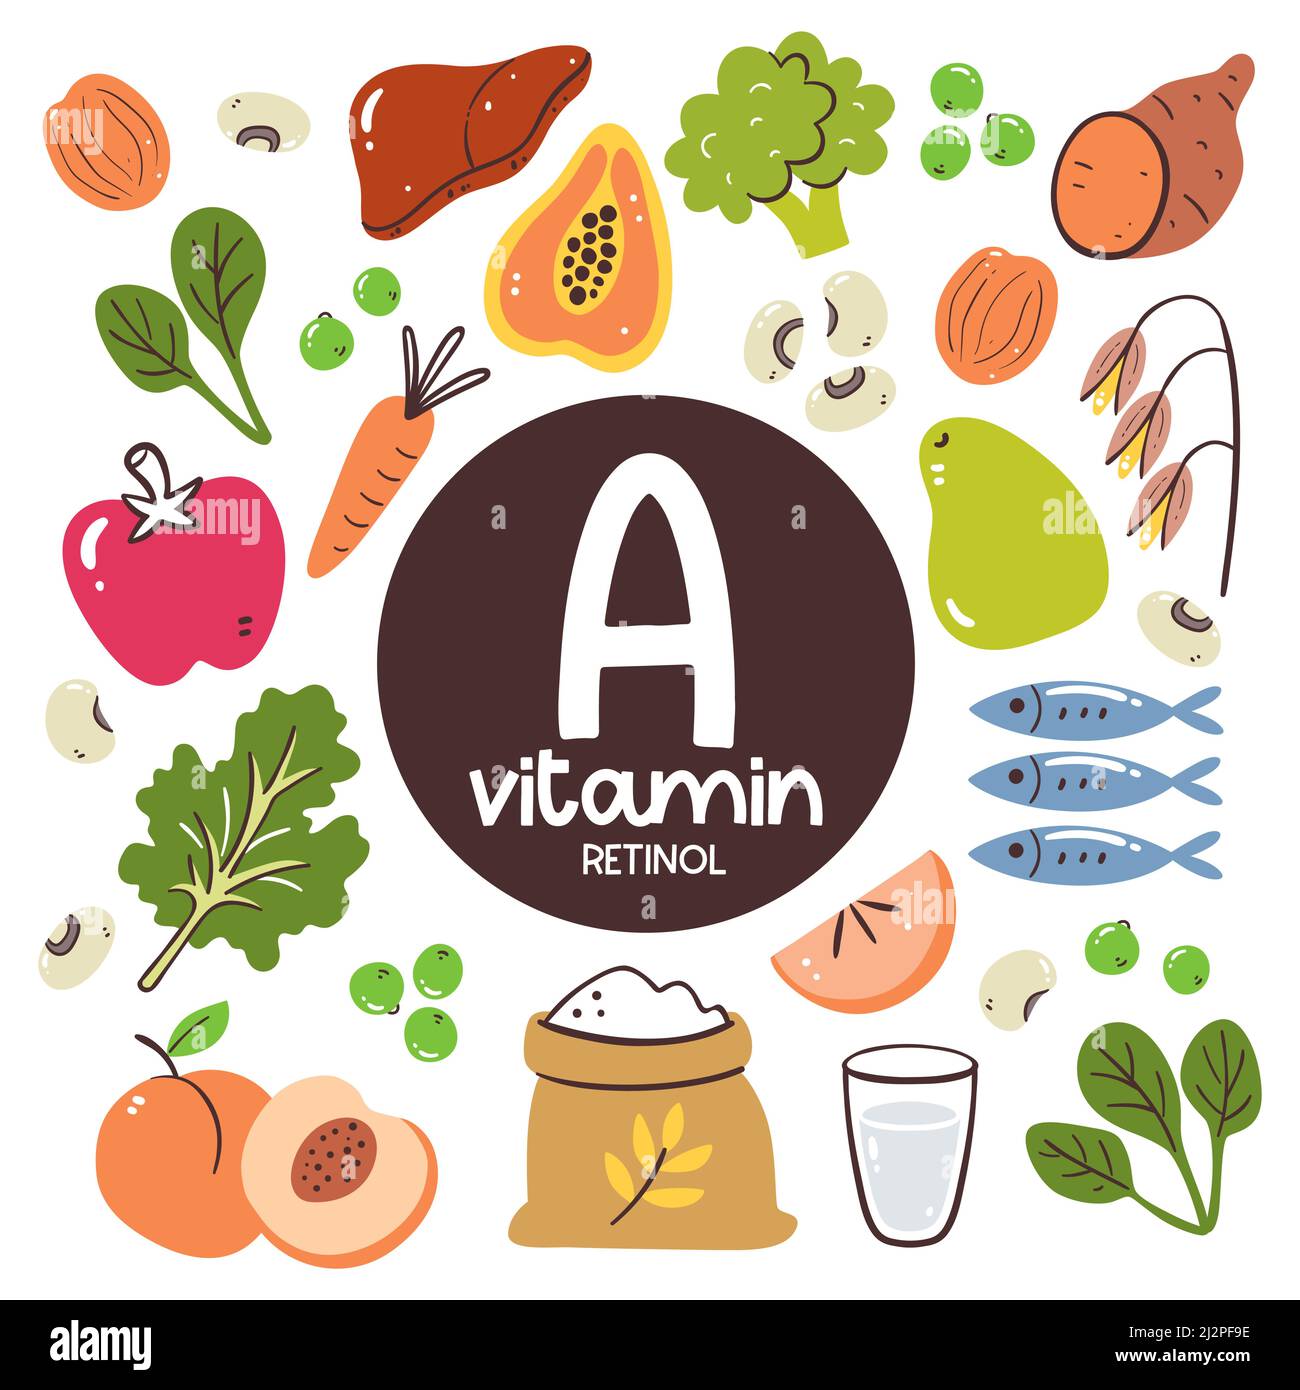 Food products with high level of Vitamin A (Retinol). Cooking ingredients. Fruits, vegetables, legumes, grain, fish. Stock Vector